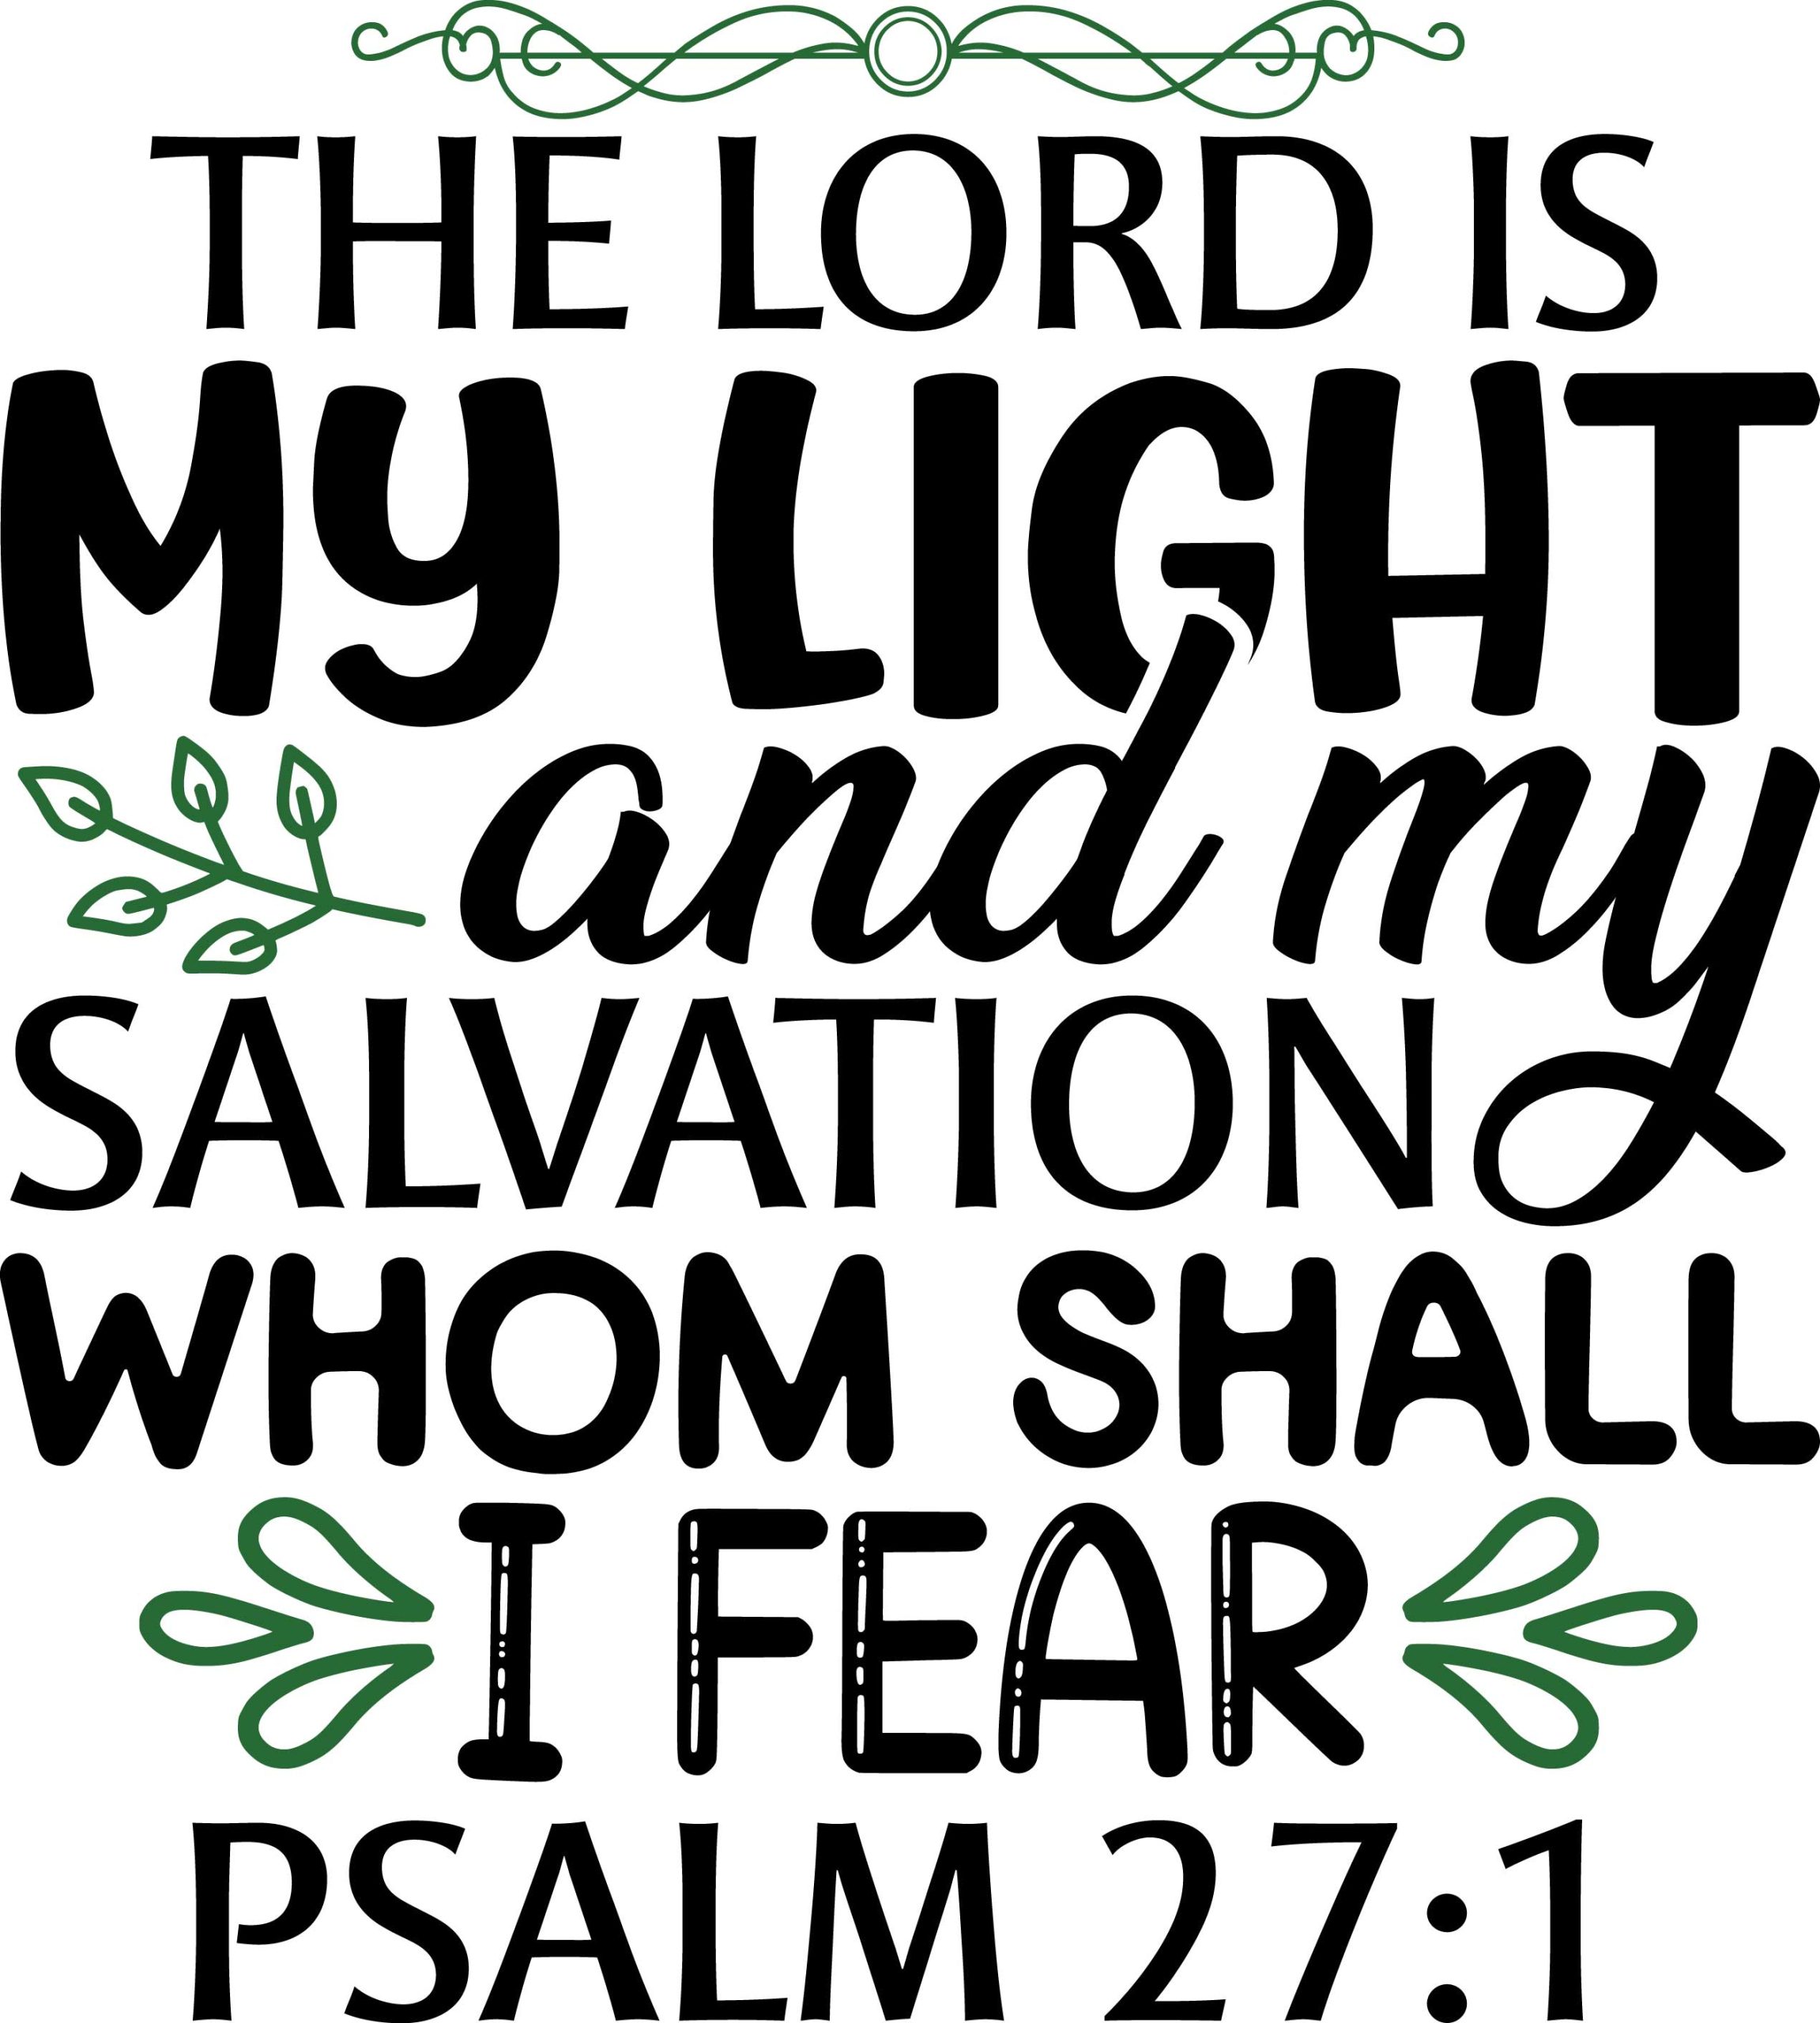 the lord is my light and my salvation whom shall i fear psalm 27:1, bible verses, scripture verses, svg files, passages, sayings, cricut designs, silhouette, embroidery, bundle, free cut files, design space, vector